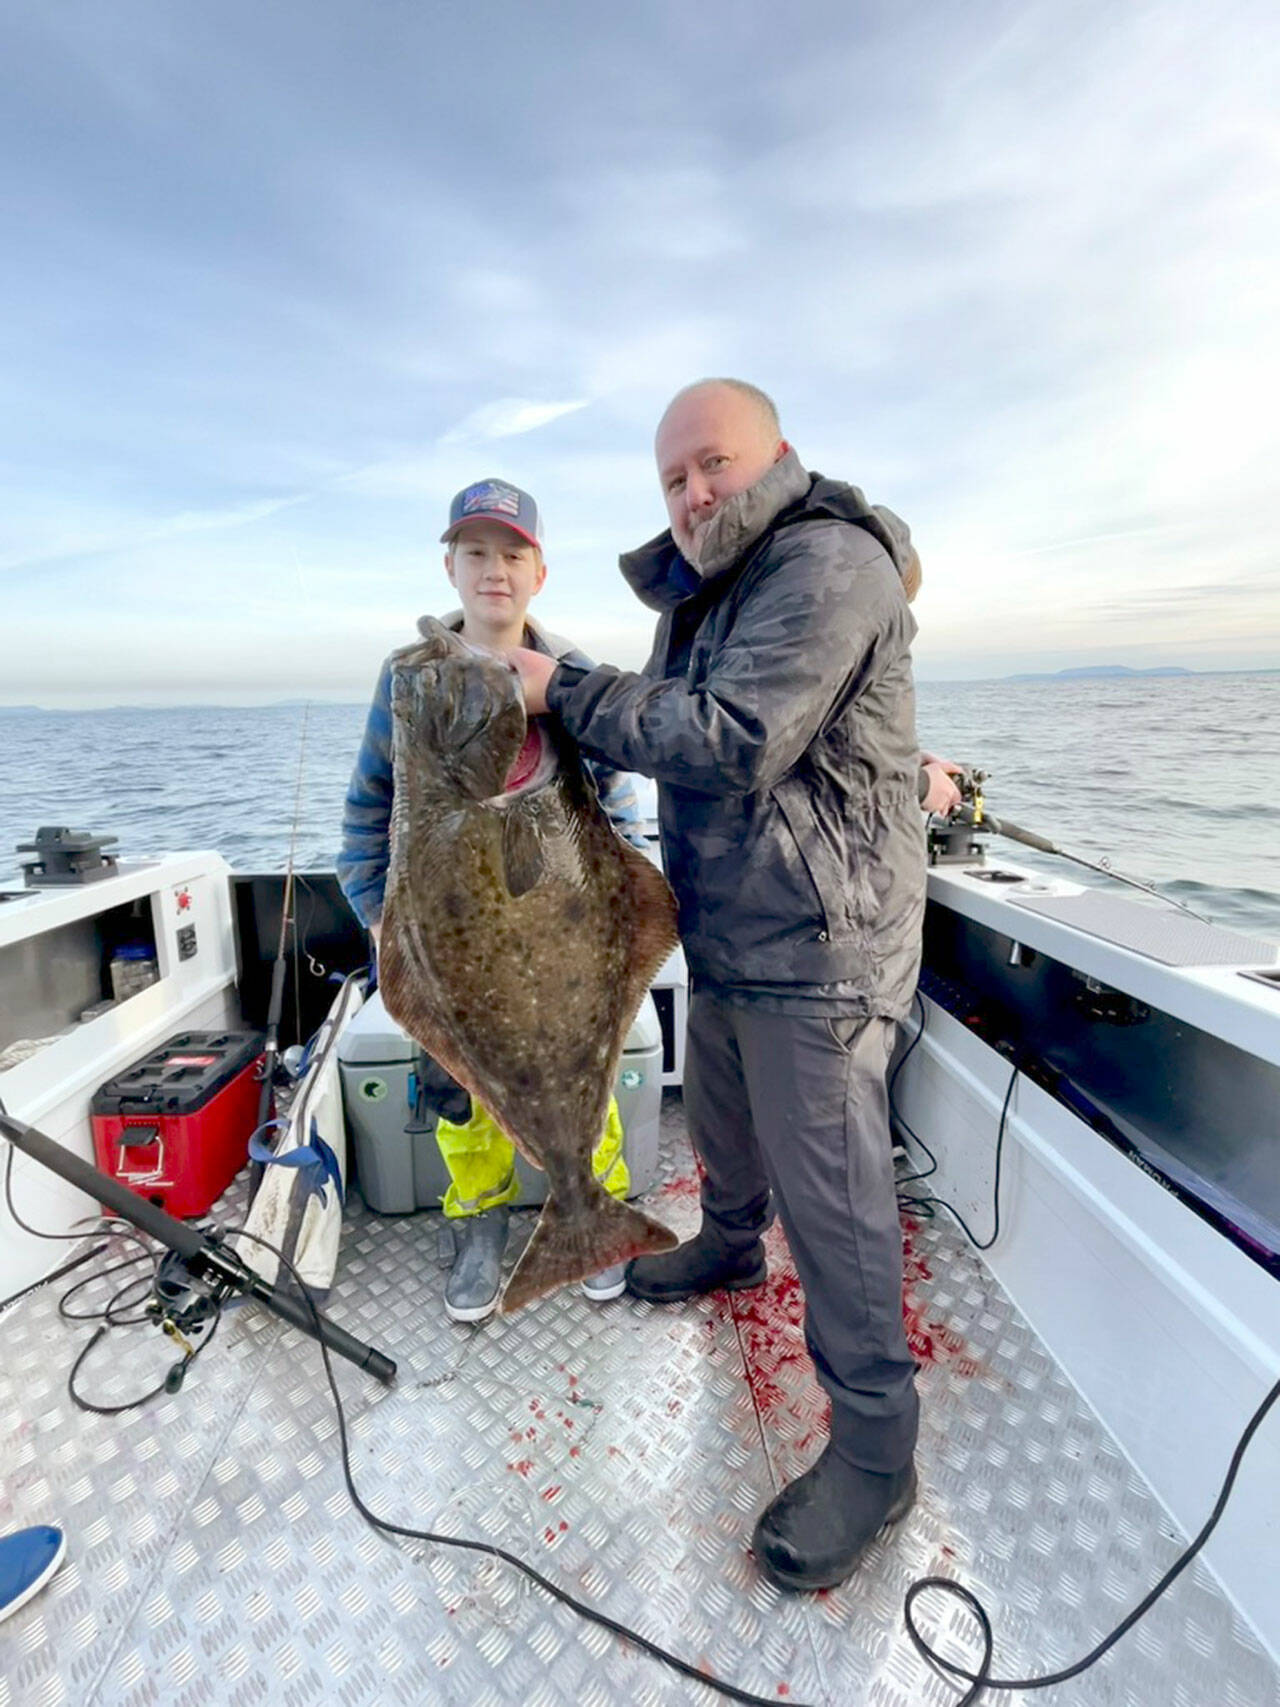 Port Ludlow’s Johnson family found success on the opening day of halibut season last week. Caleb Johnson, age 12, caught this 43-pound specimen held by his dad Jeremiah. The family planned to target lingcod on their next family fishing outing.